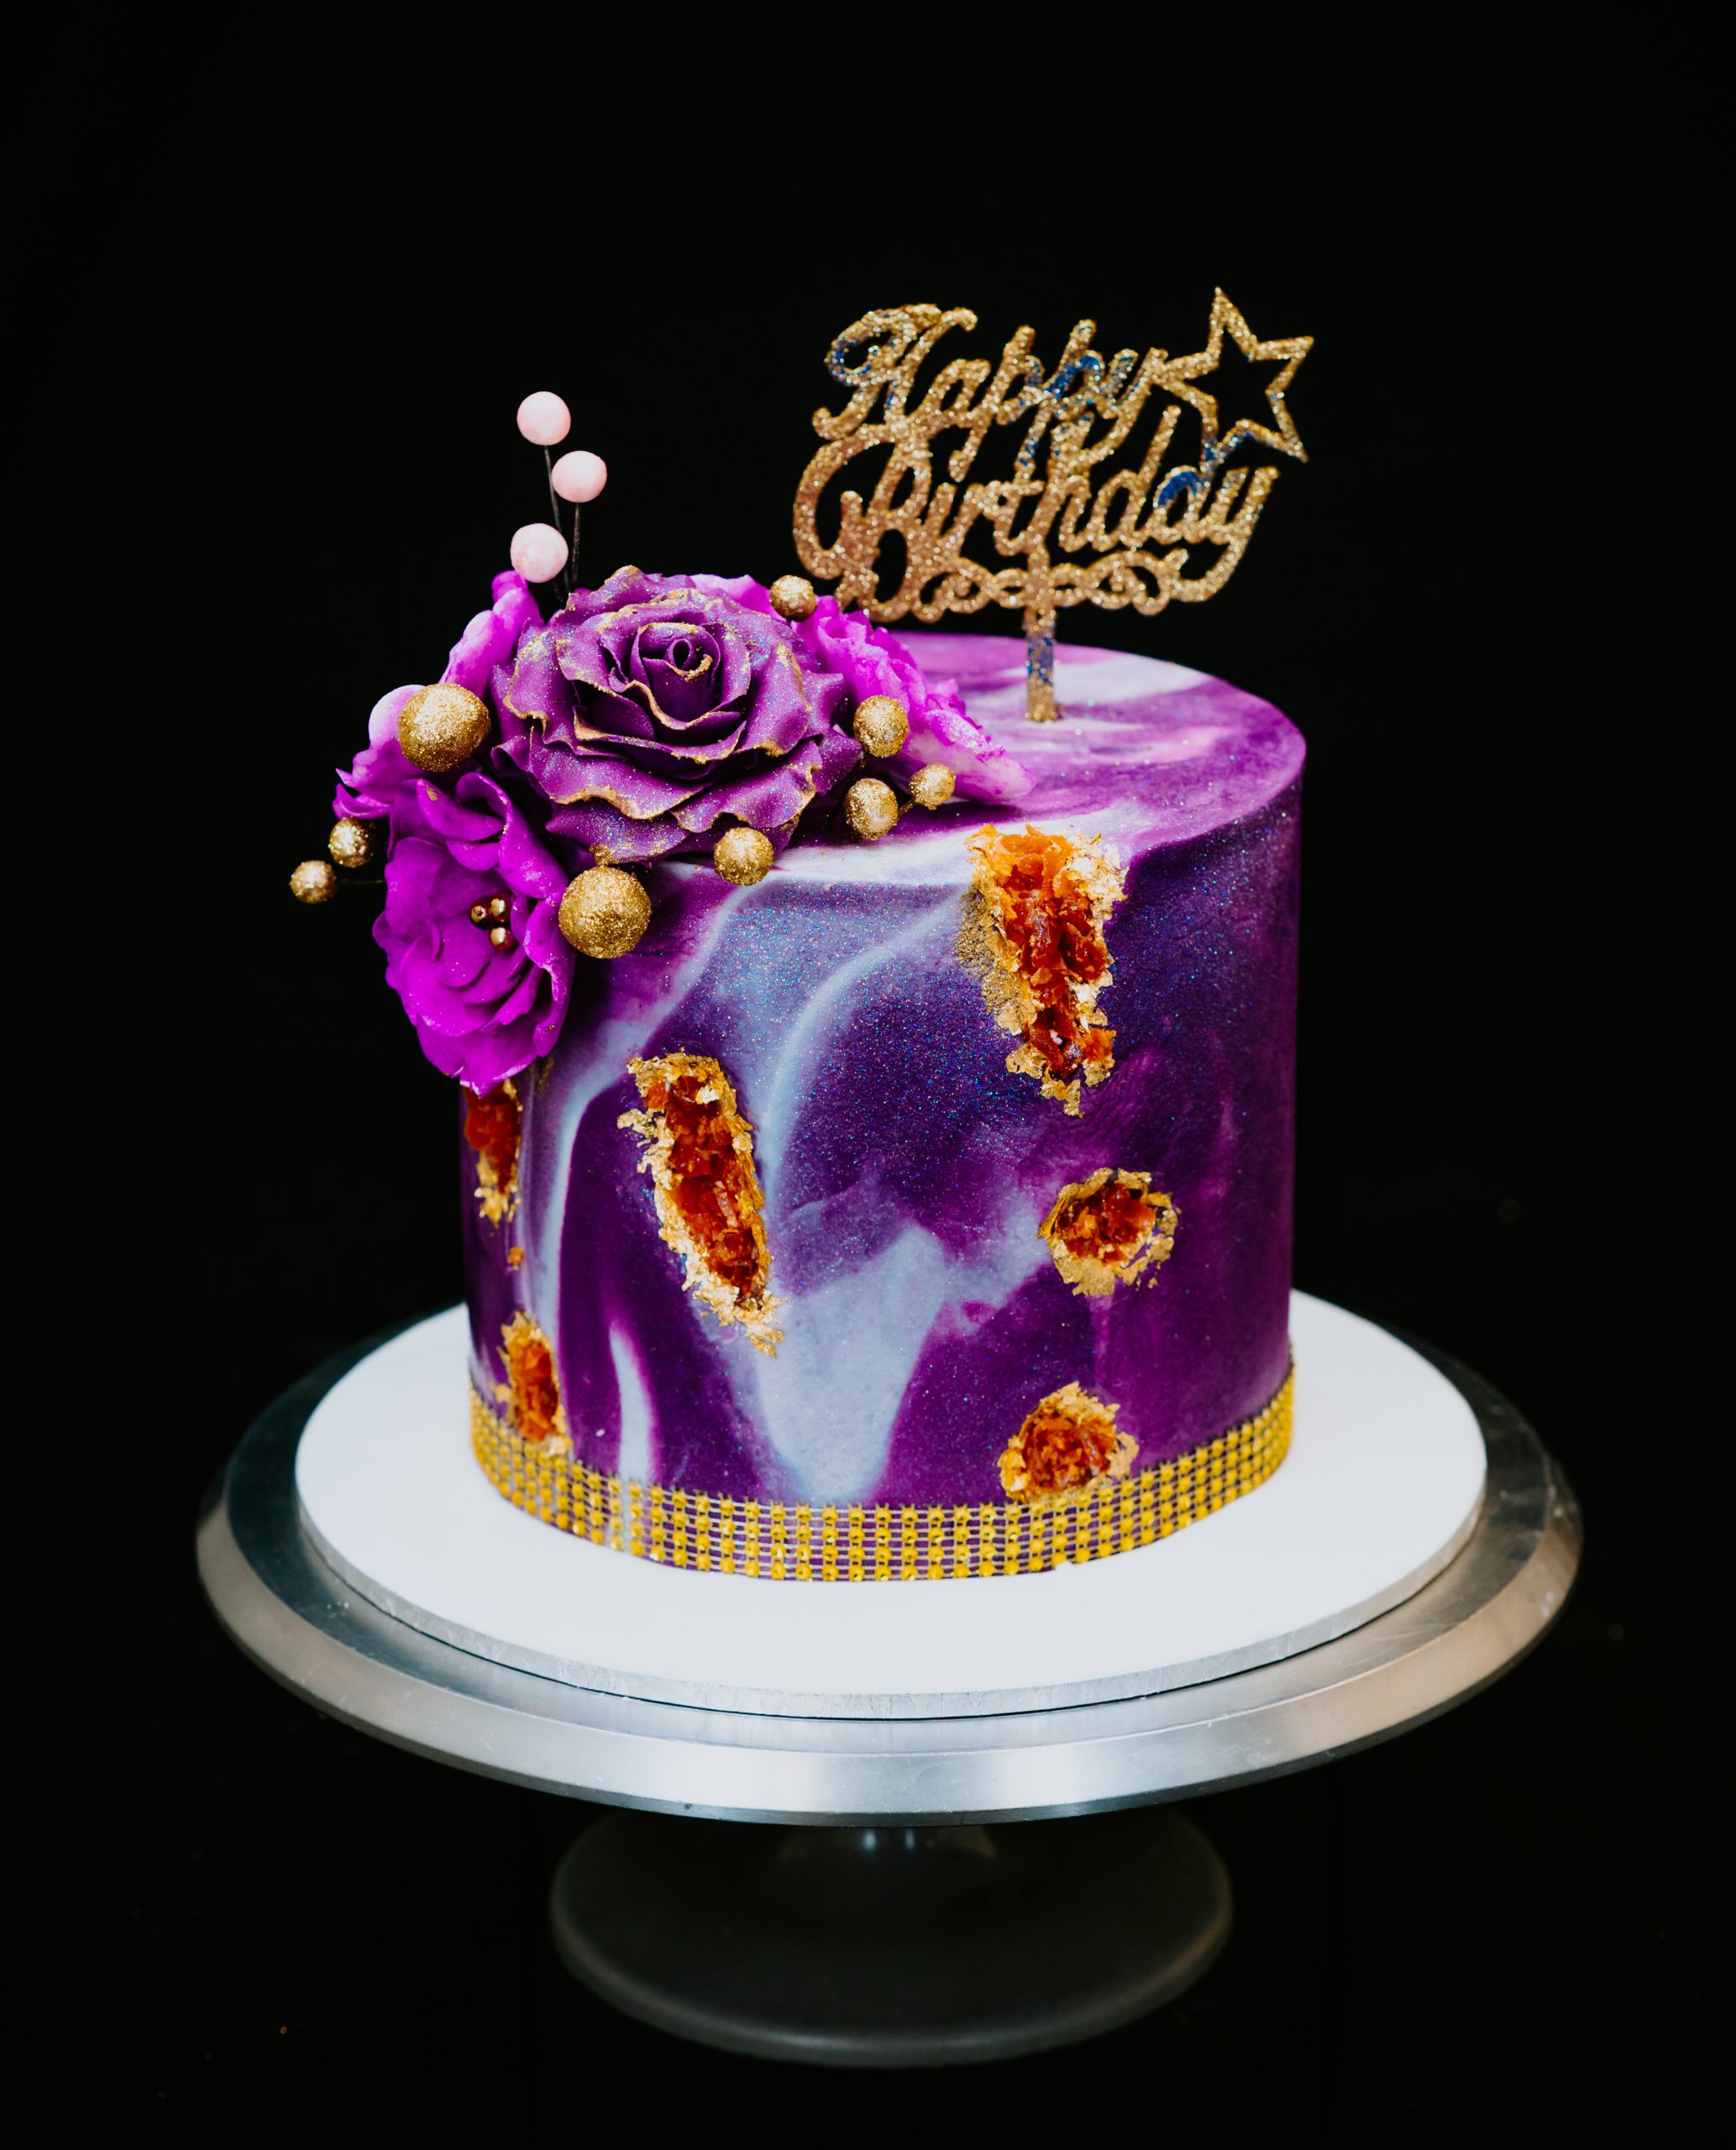 50th Birthday Purple Damask Cake by Corpse-Queen on DeviantArt